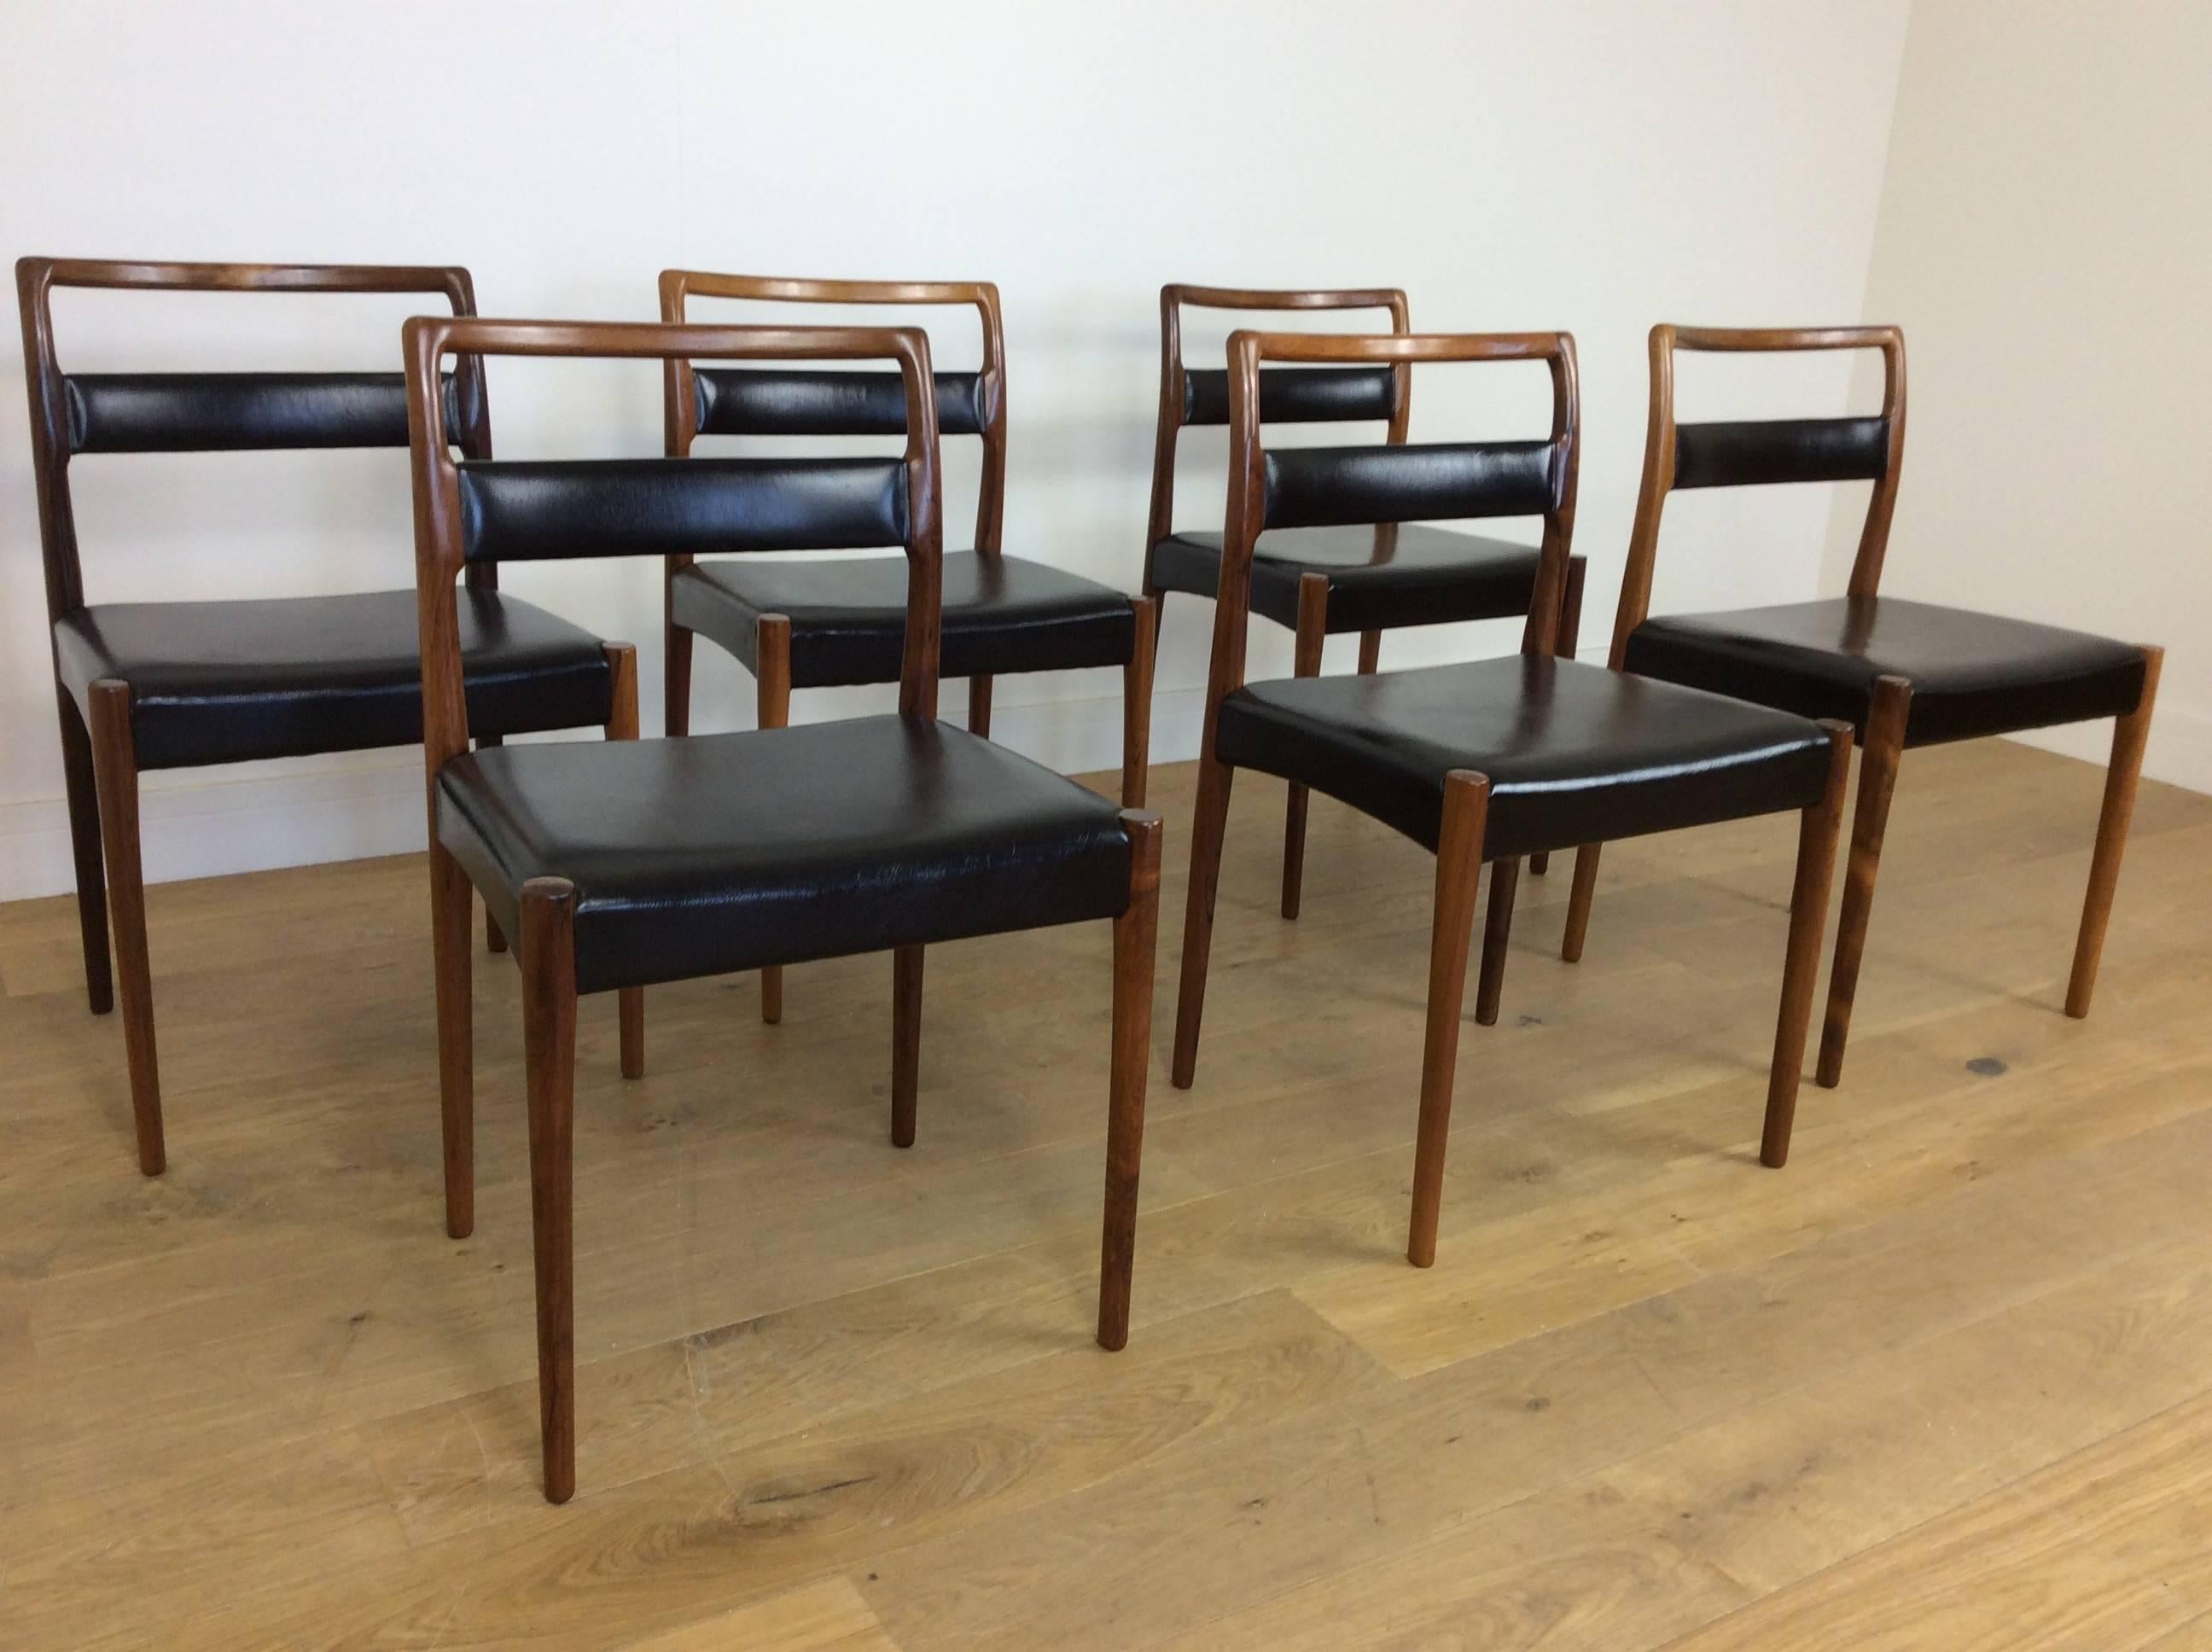 Midcentury rosewood dining table and six chairs.
Beautiful rosewood extendable dining table with six rosewood and vinyl chairs.
Measures: Table 73 cm H, 150 cm W, 105 cm D each leaf is 50 cm
Chairs 80 cm H, 49 cm W, 43 cm D
Danish, circa 1960.